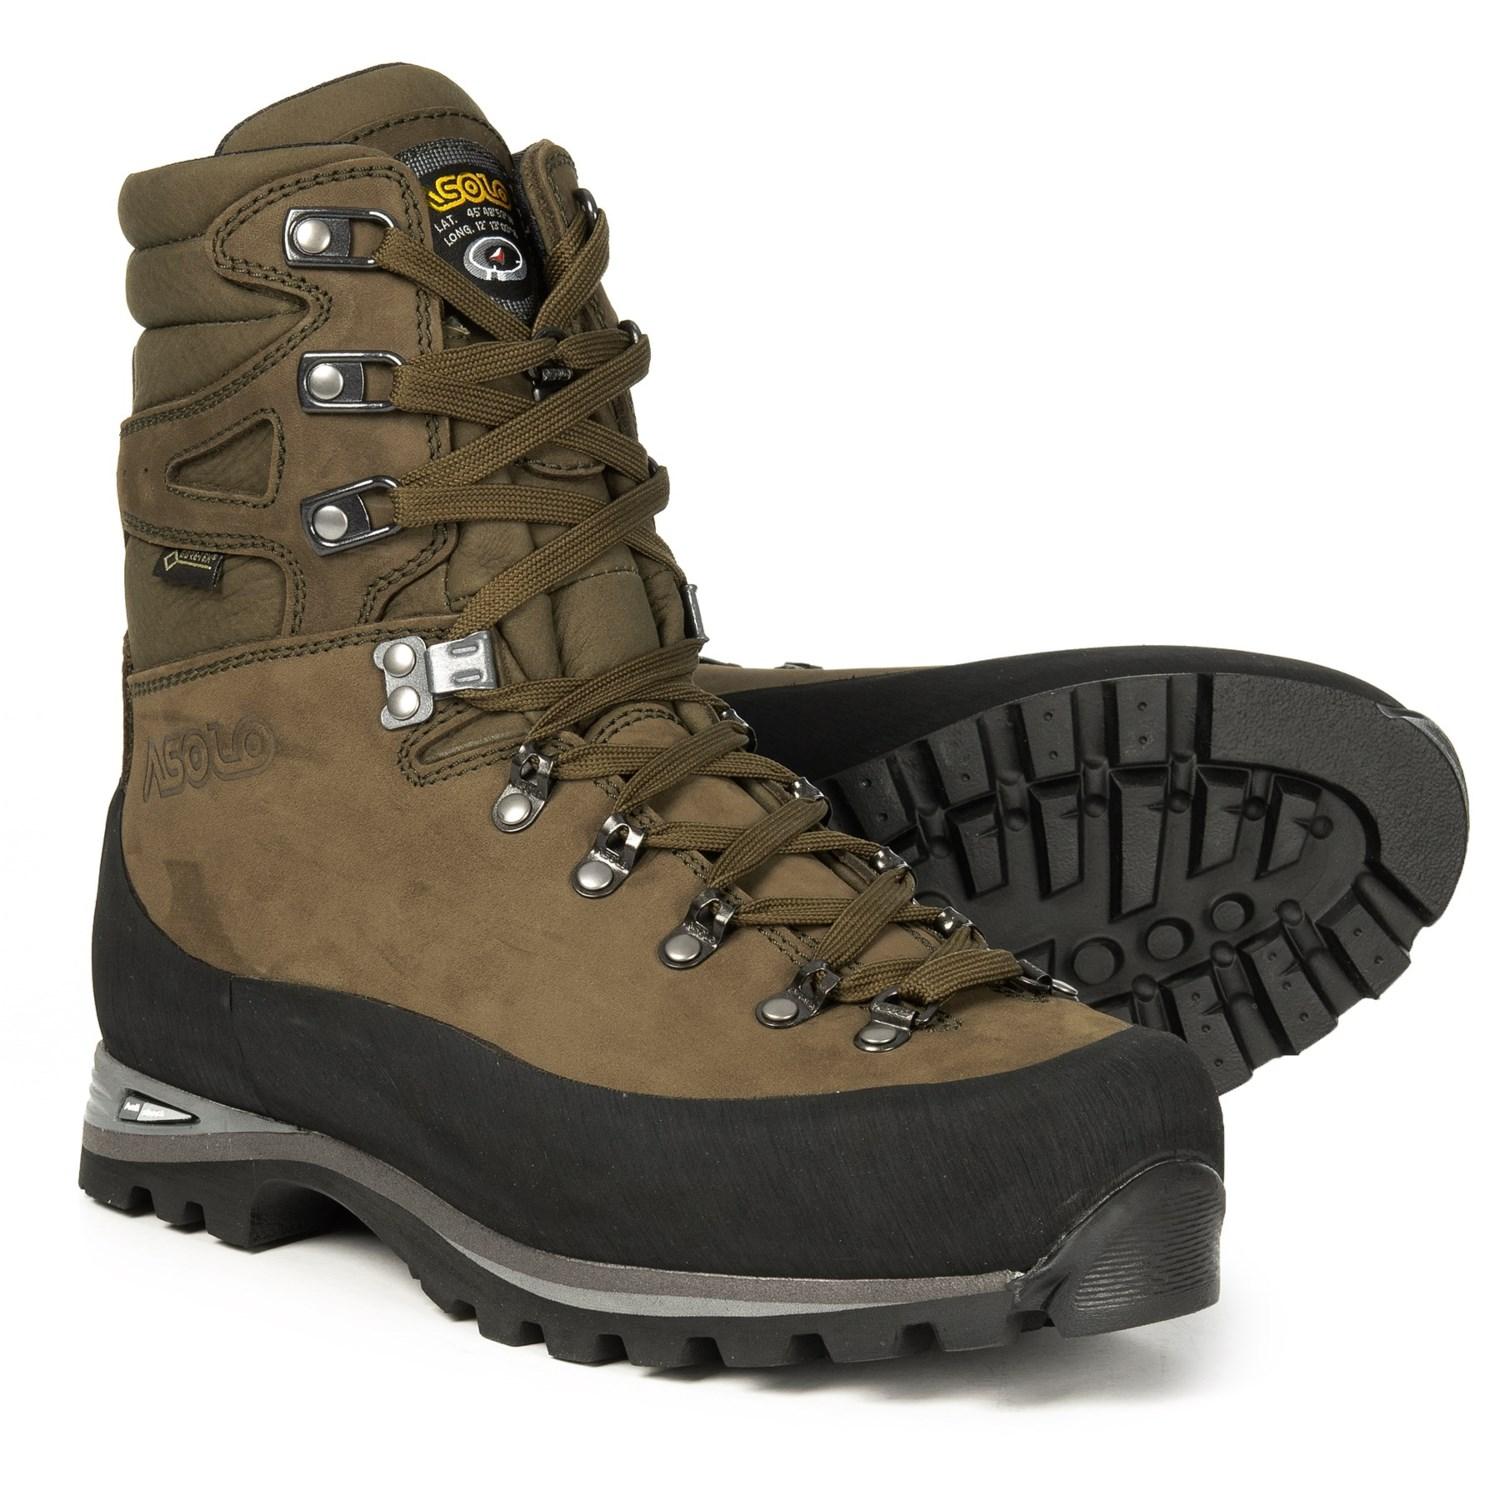 Asolo Leather Hunter Extreme Gv Gore-tex(r) Hunting Boots for Men 